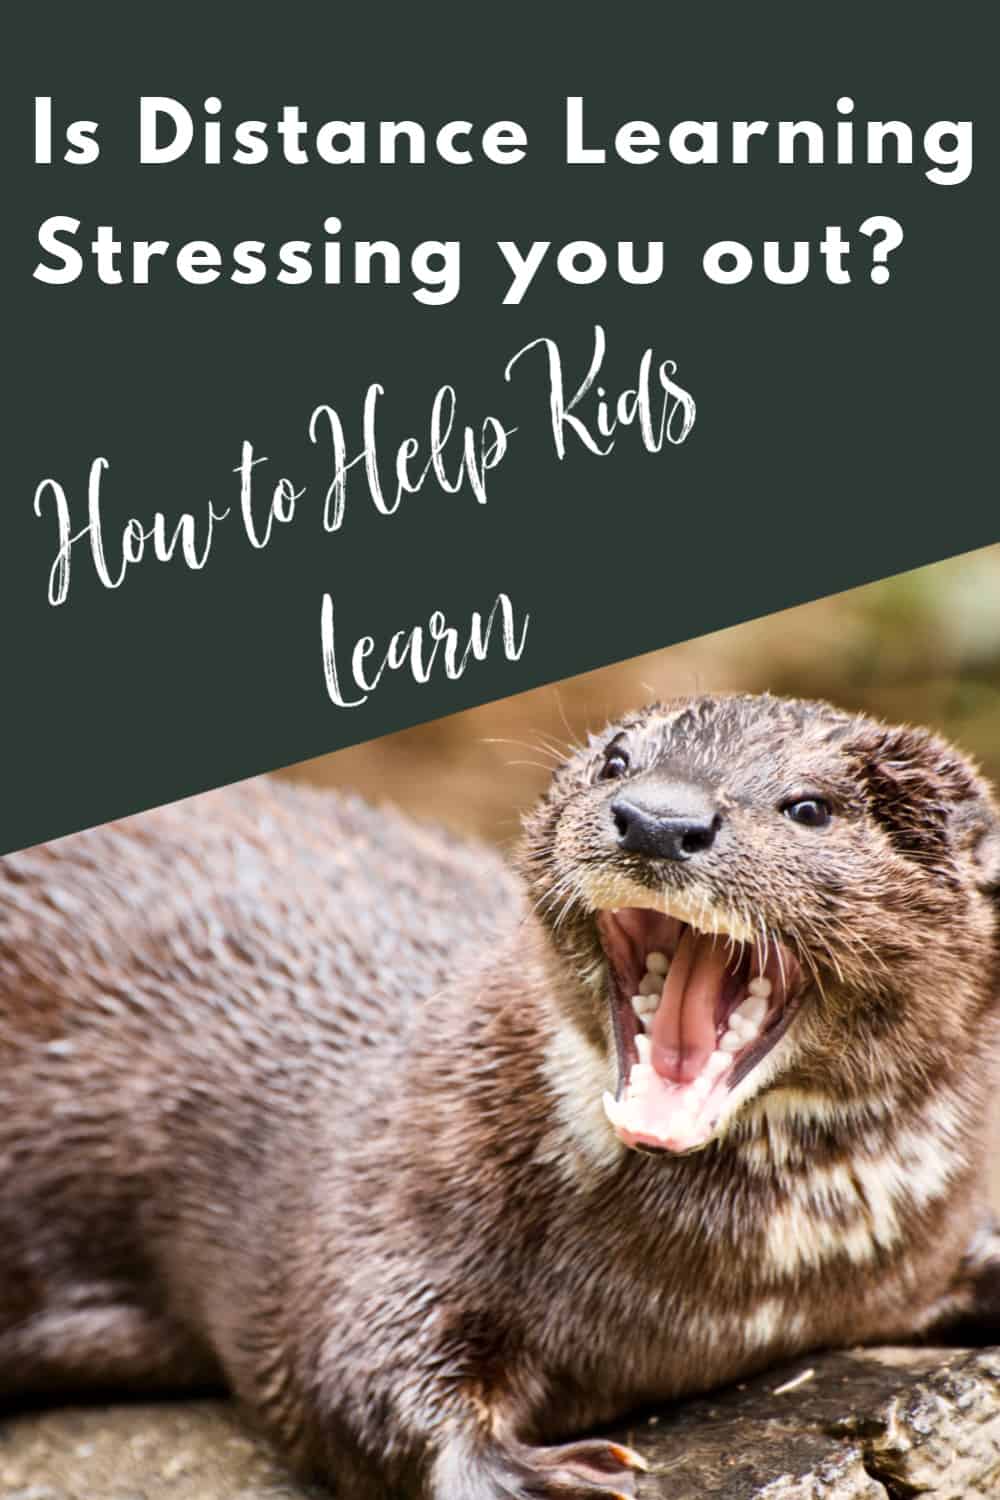 How to Help Kids Learn - Don't let distance learning stress you out with these simple tips to help kids learn.